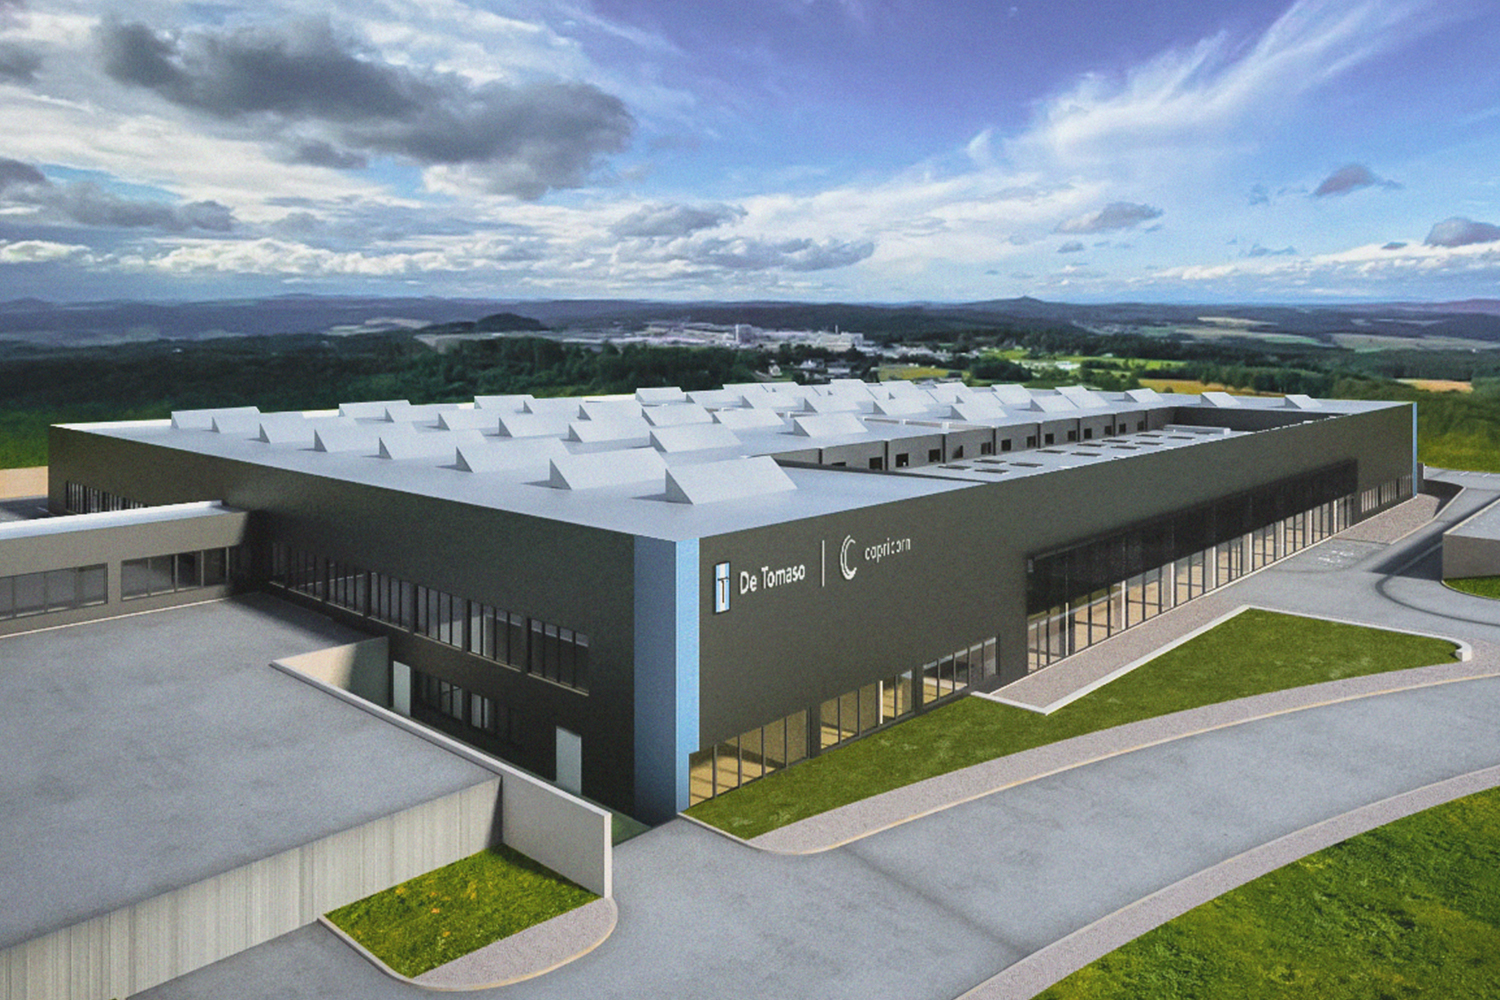 A rendering of De Tomaso and Capricorn Group's new production facility next to the Nürburgring racetrack in Nürburg, Germany